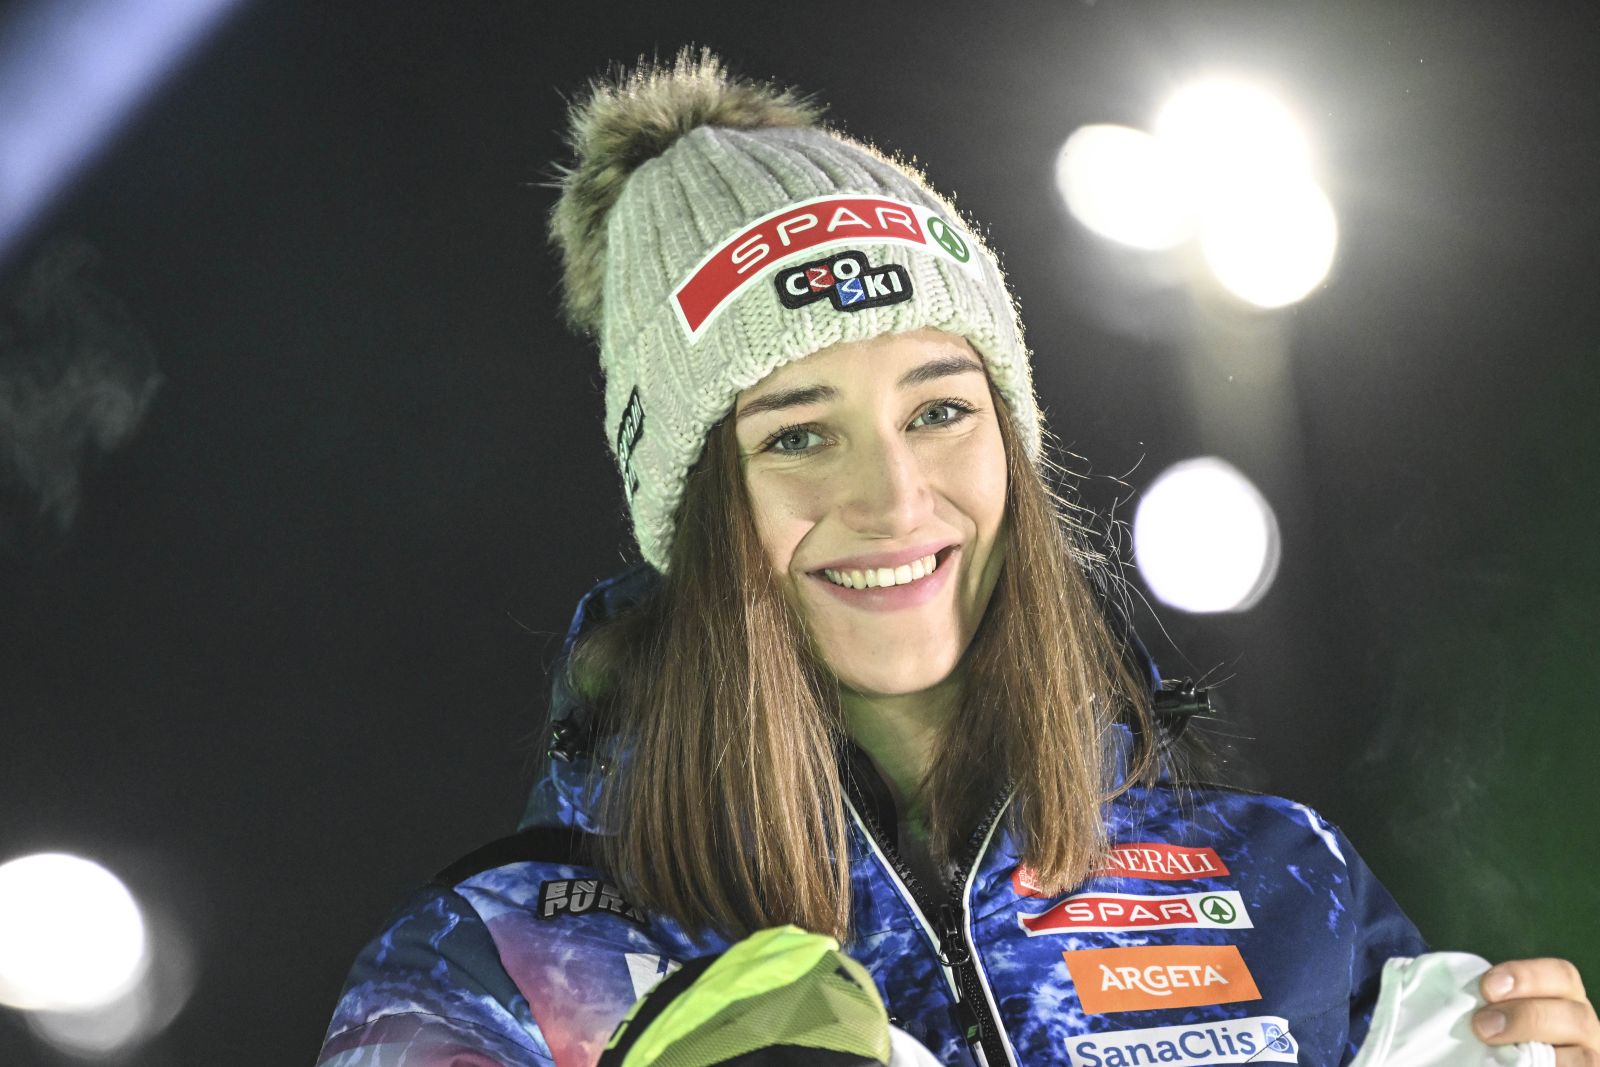 epa10968866 Leona Popovic from Croatia smiles during the public draw for the women's slalom race at the FIS Alpine Skiing World Cup in Levi, Finland, 10 November 2023. The slalom race takes place on 11 and 12 November 2023  EPA/KIMMO BRANDT